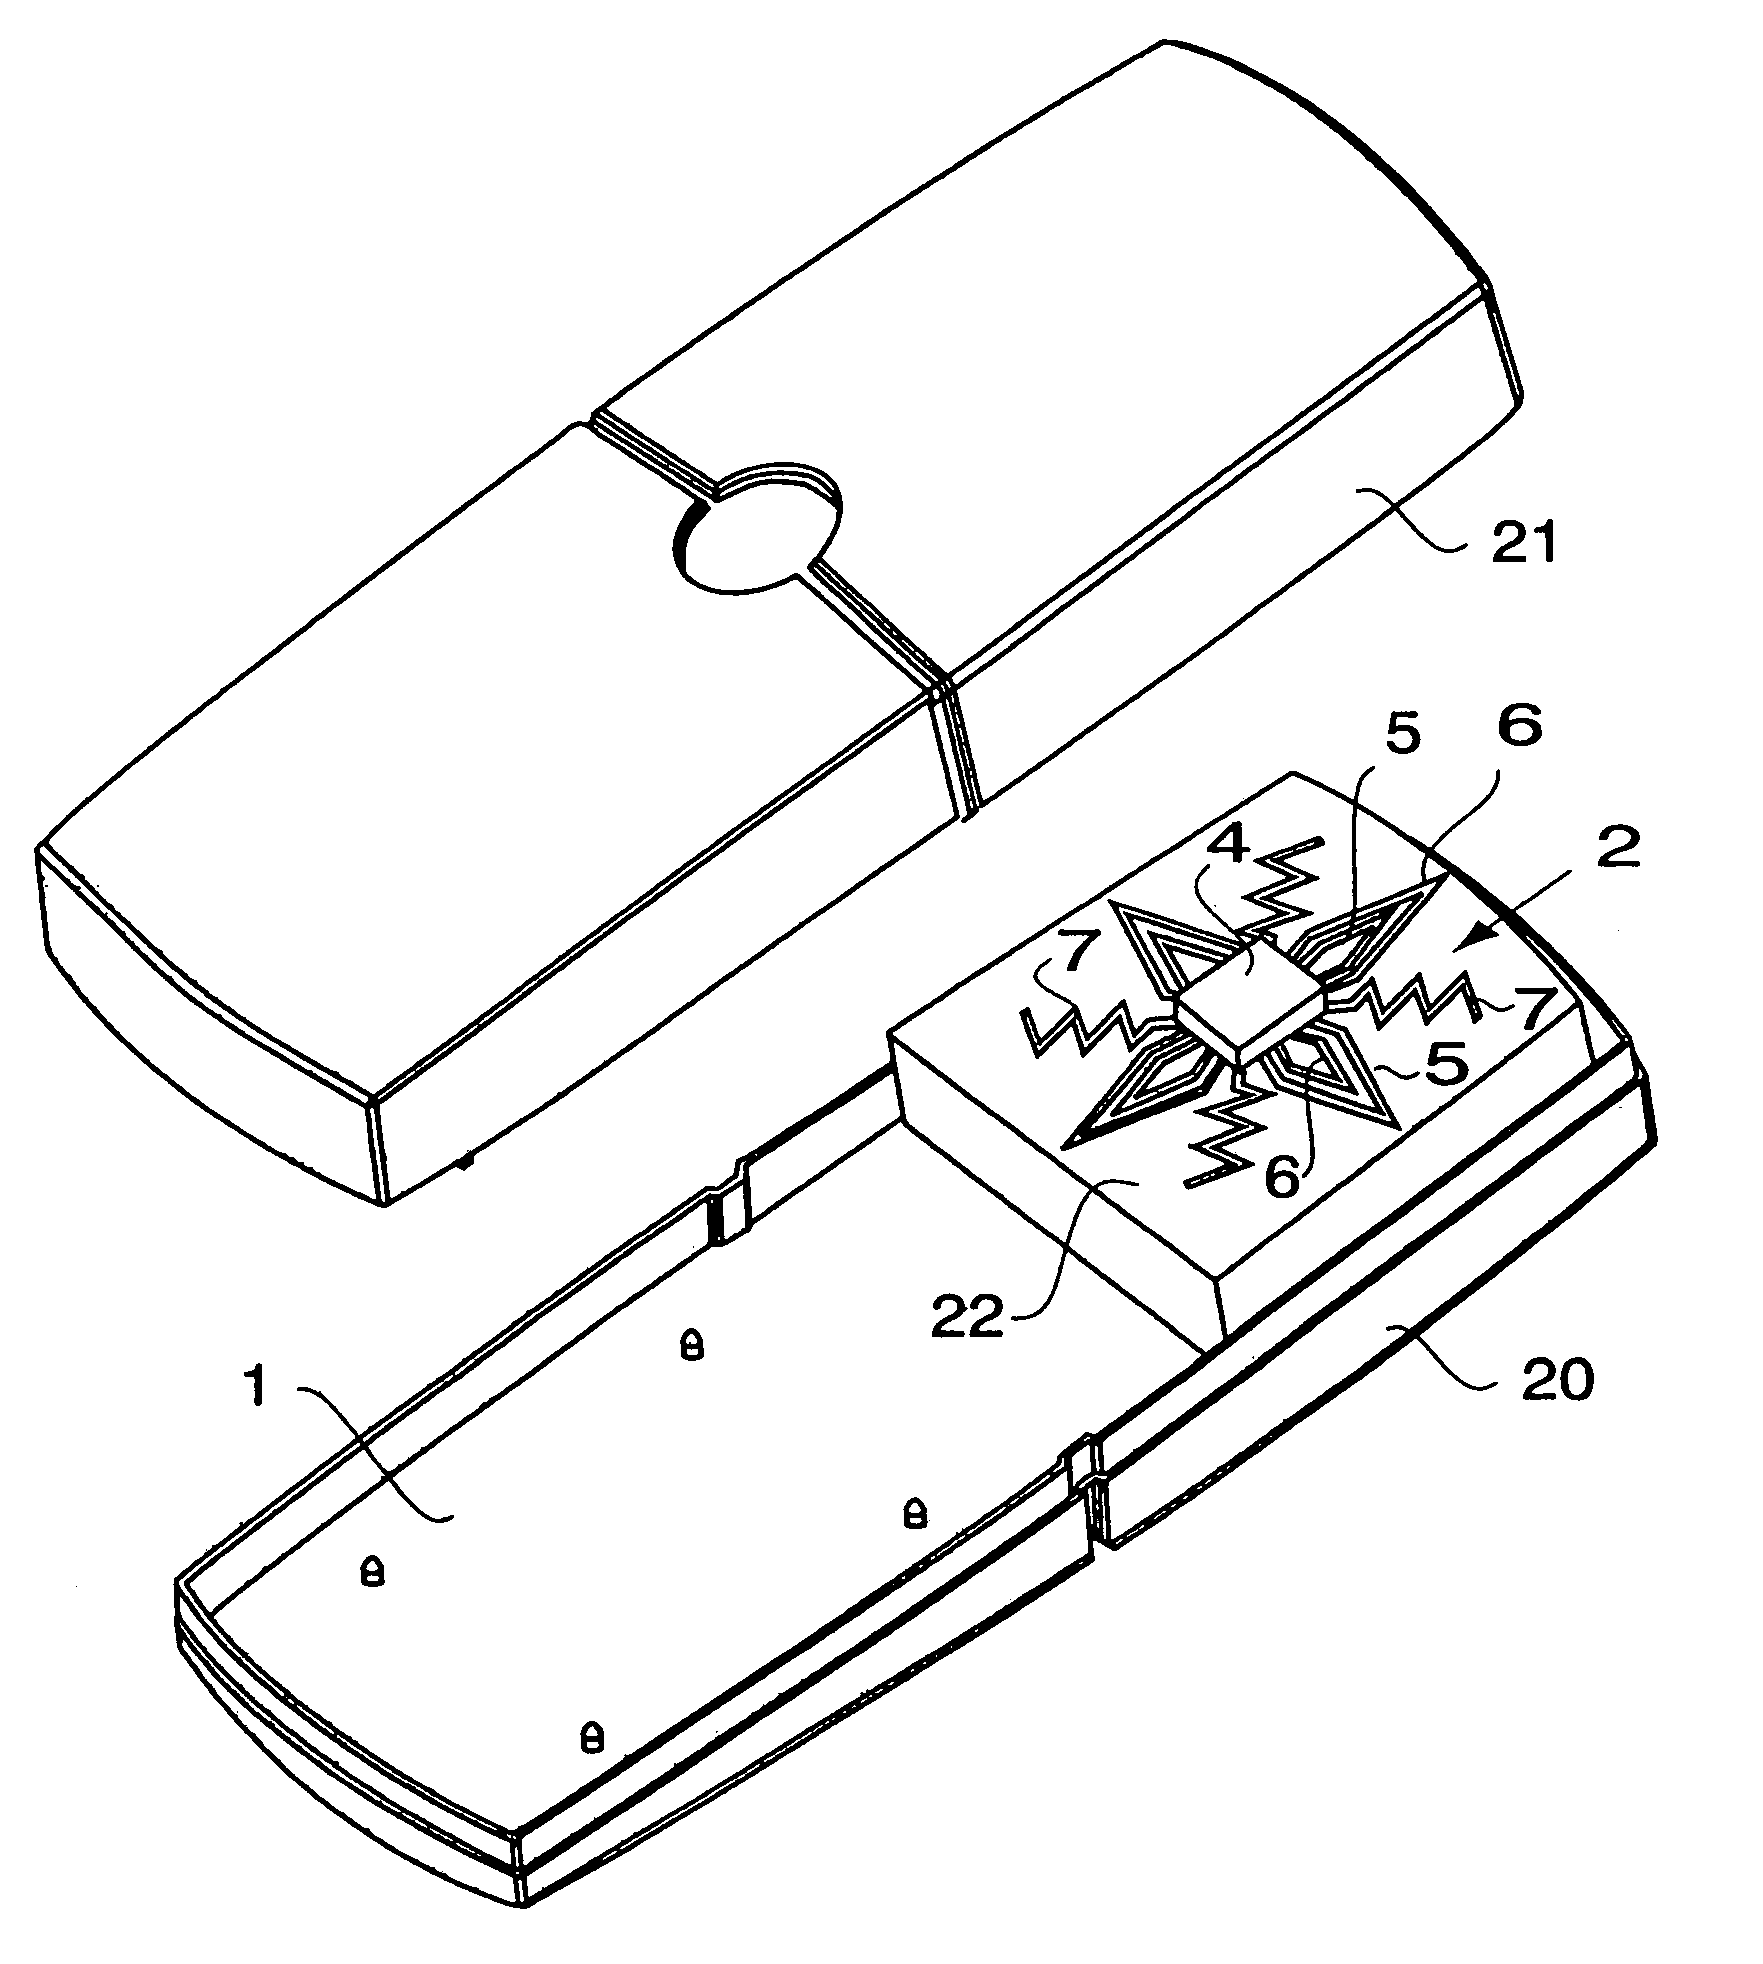 Antenna device for transmitting and/or receiving radio frequency waves and method related thereto